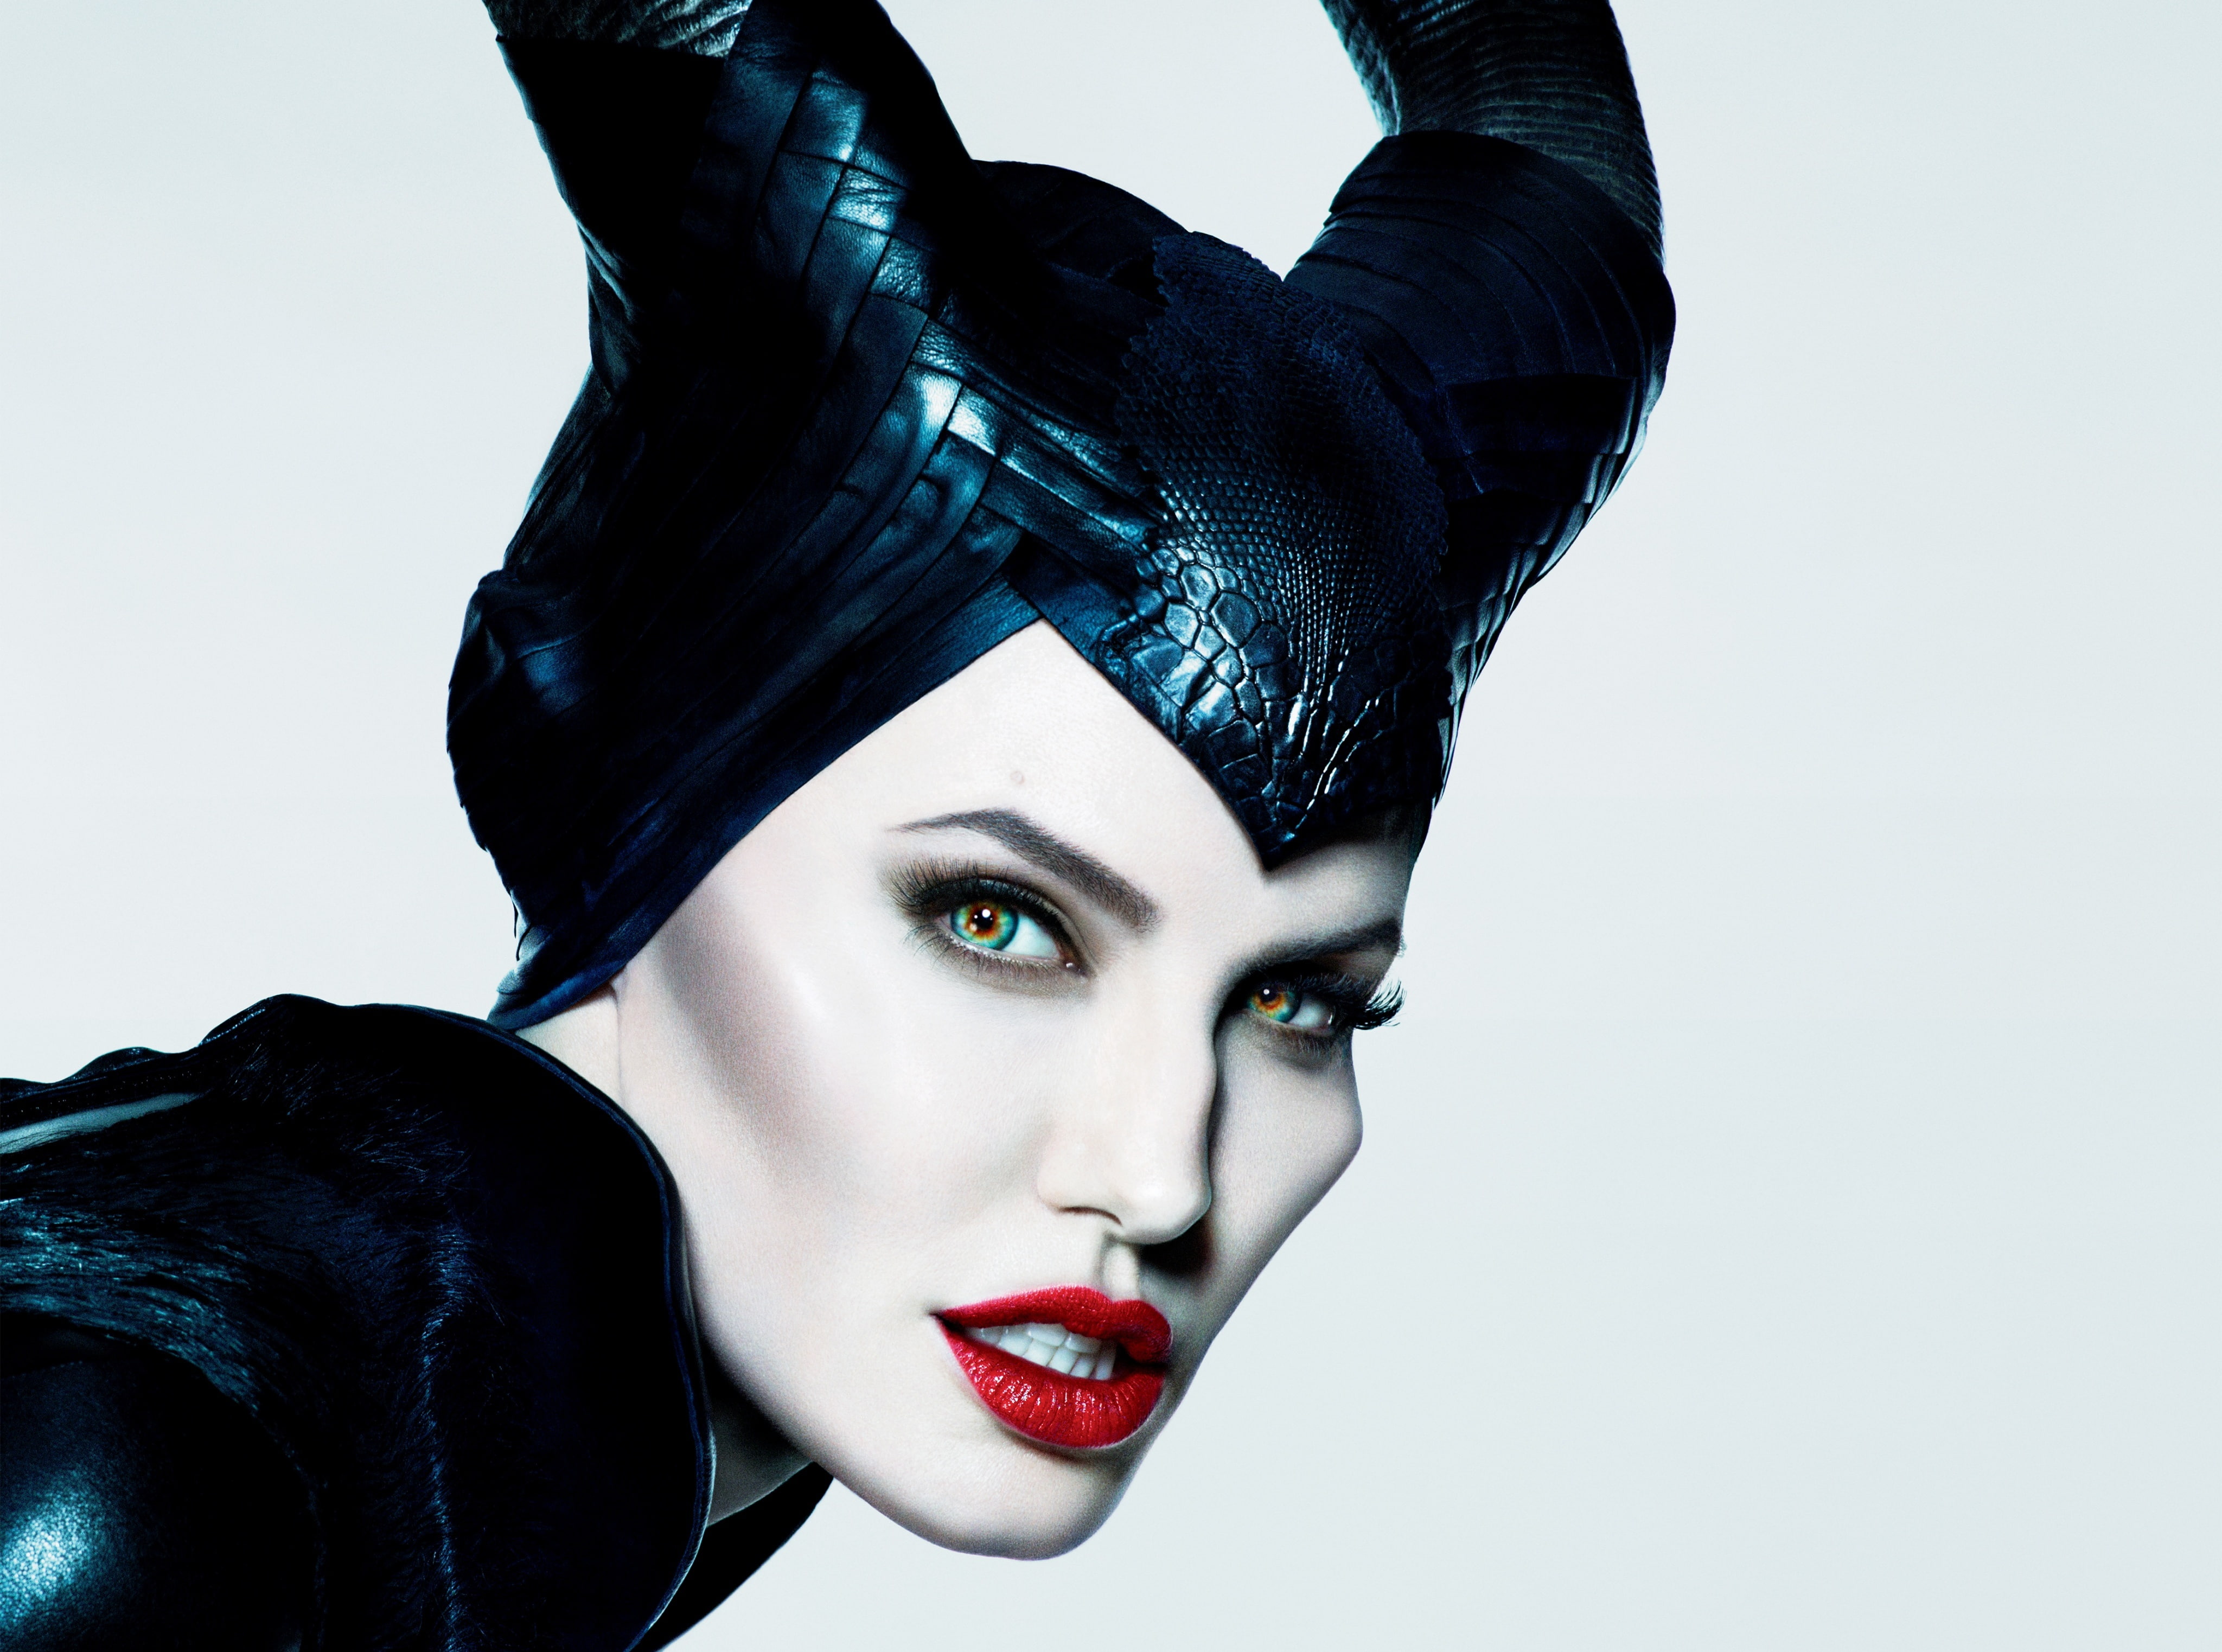 Free Download Hd Wallpaper Maleficent Angelina Jolie Beauty Angelina Jolie As Maleficent 